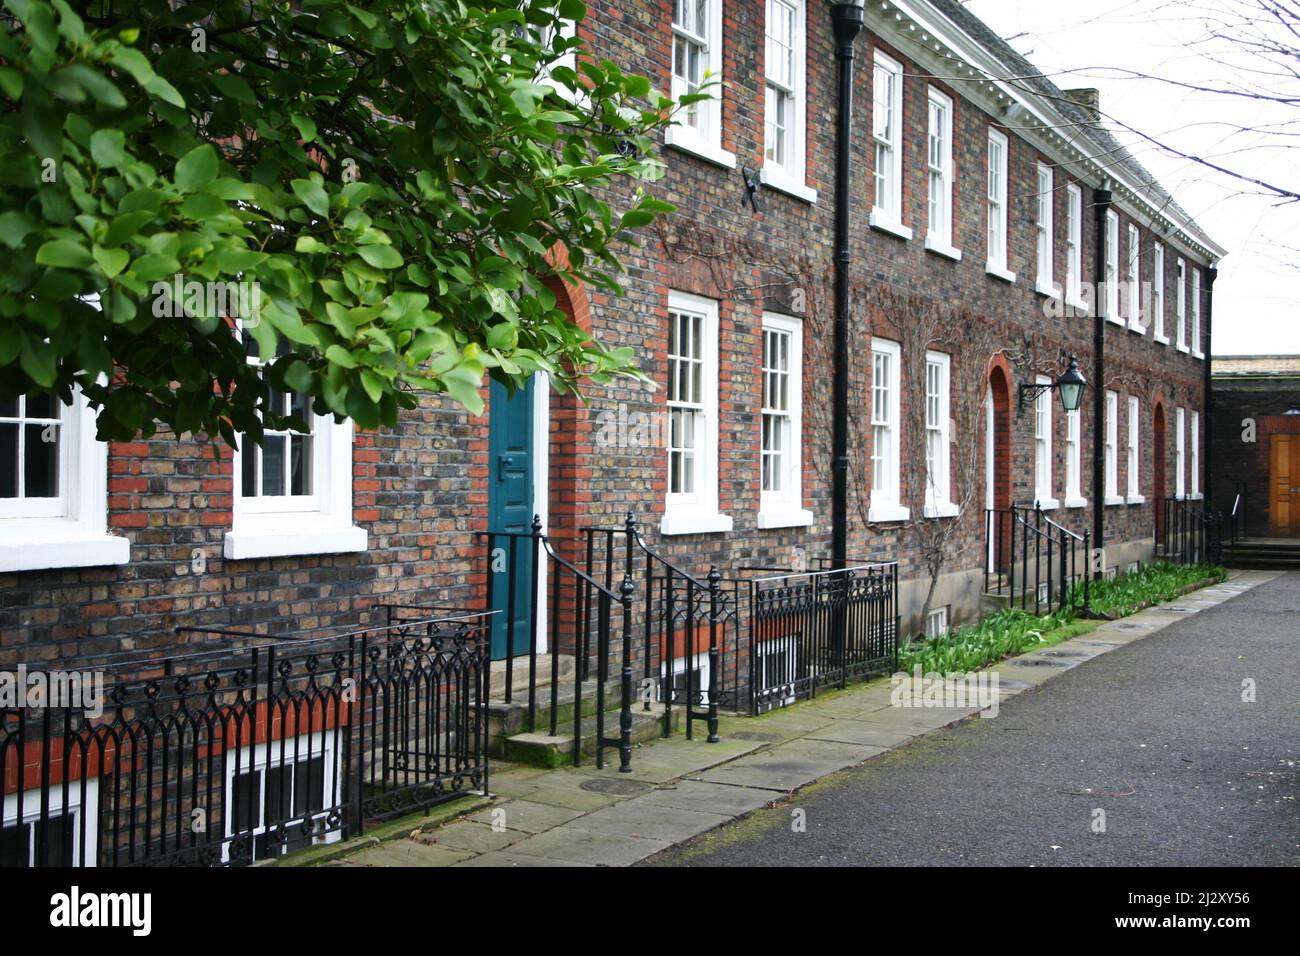 Traditional Terraced Houses, London. A row of old Georgian terraced town houses in central London. Stock Photo